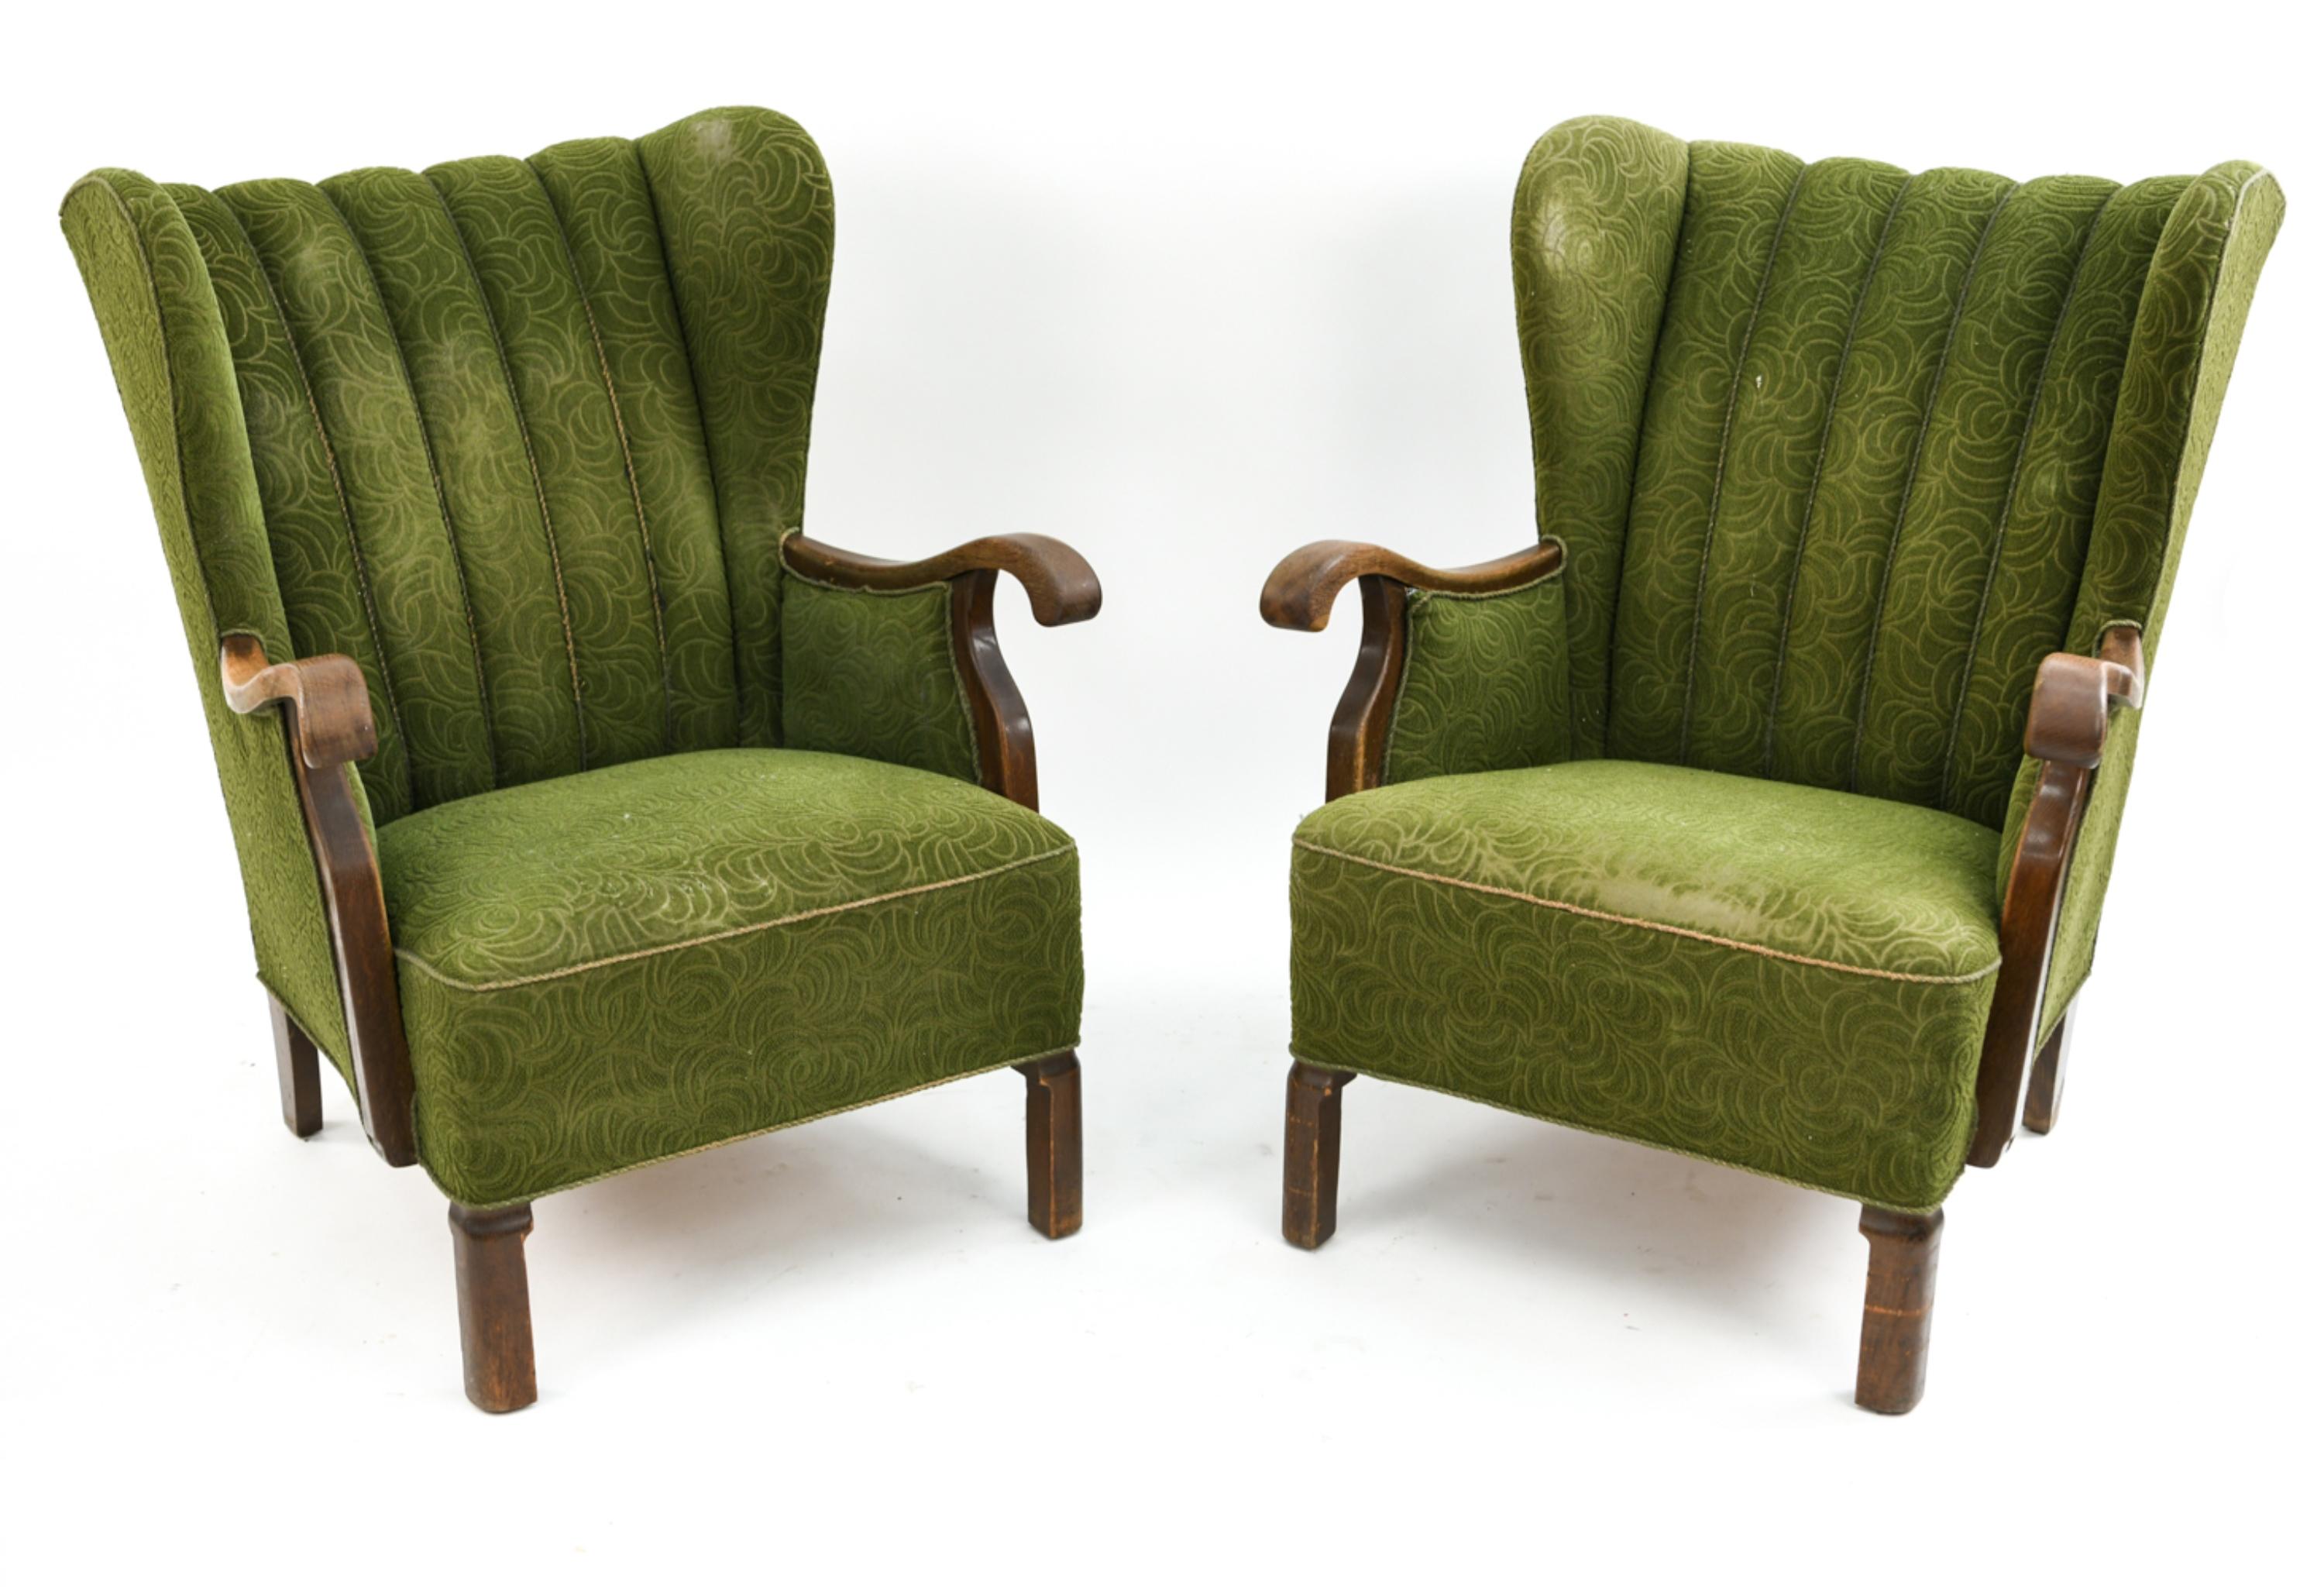 This is a magnificent pair of wingback lounge chairs designed by Viggo Boesen for Slagelse Mobelvaerk, circa 1940s. These early Danish midcentury chairs feature ribbed backs with exposed wood details including the elegantly shaped armrests. As a